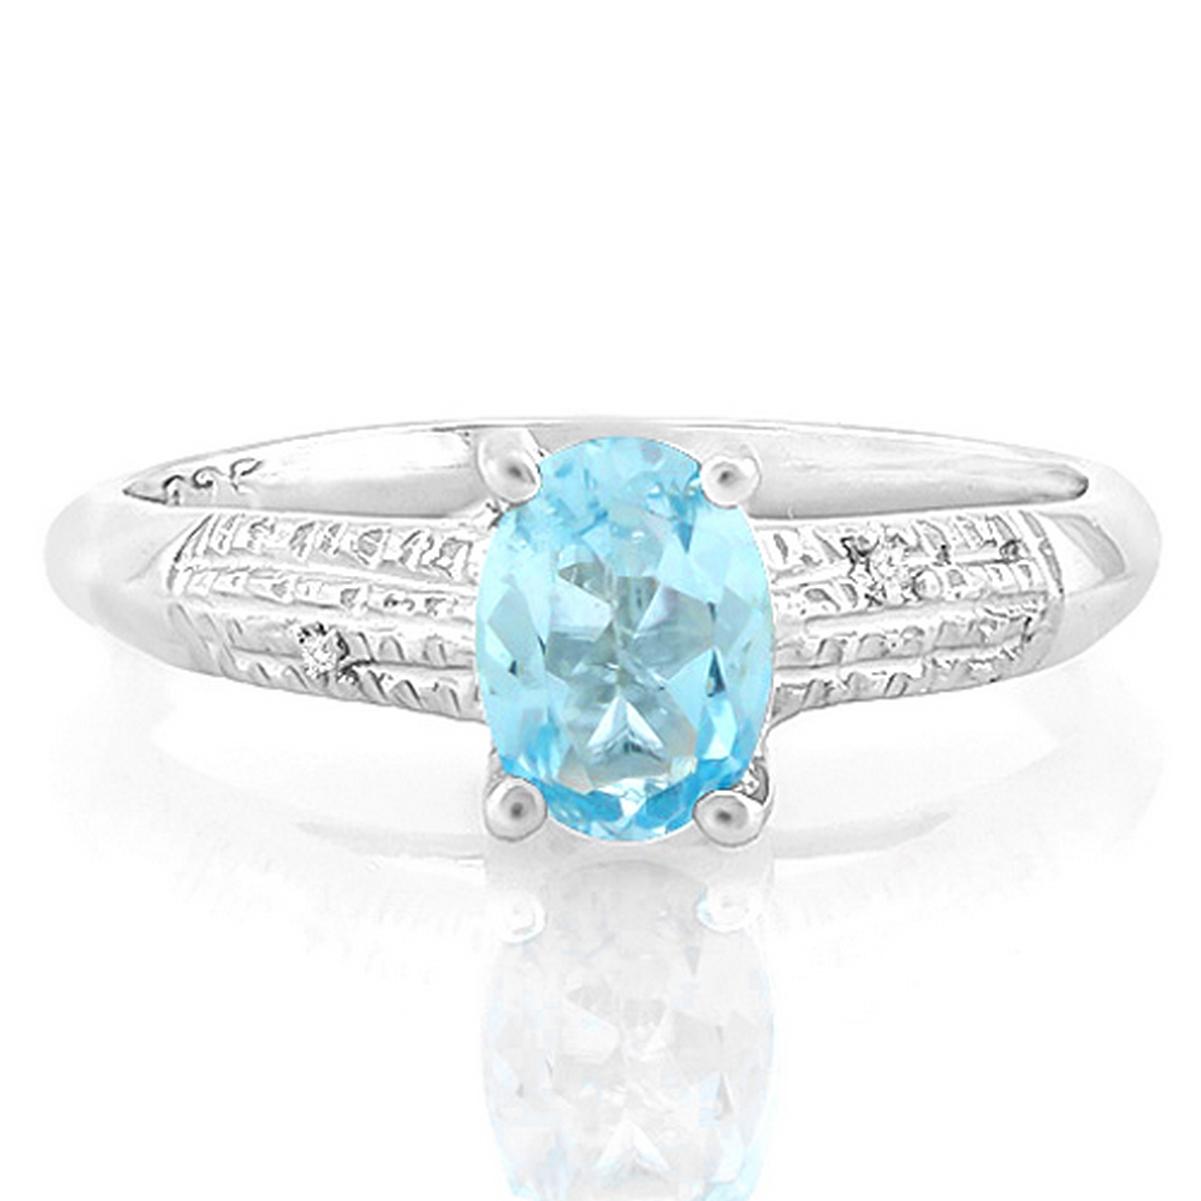 1ct Sky Blue Topaz And Diamond Ring In Sterling Silver